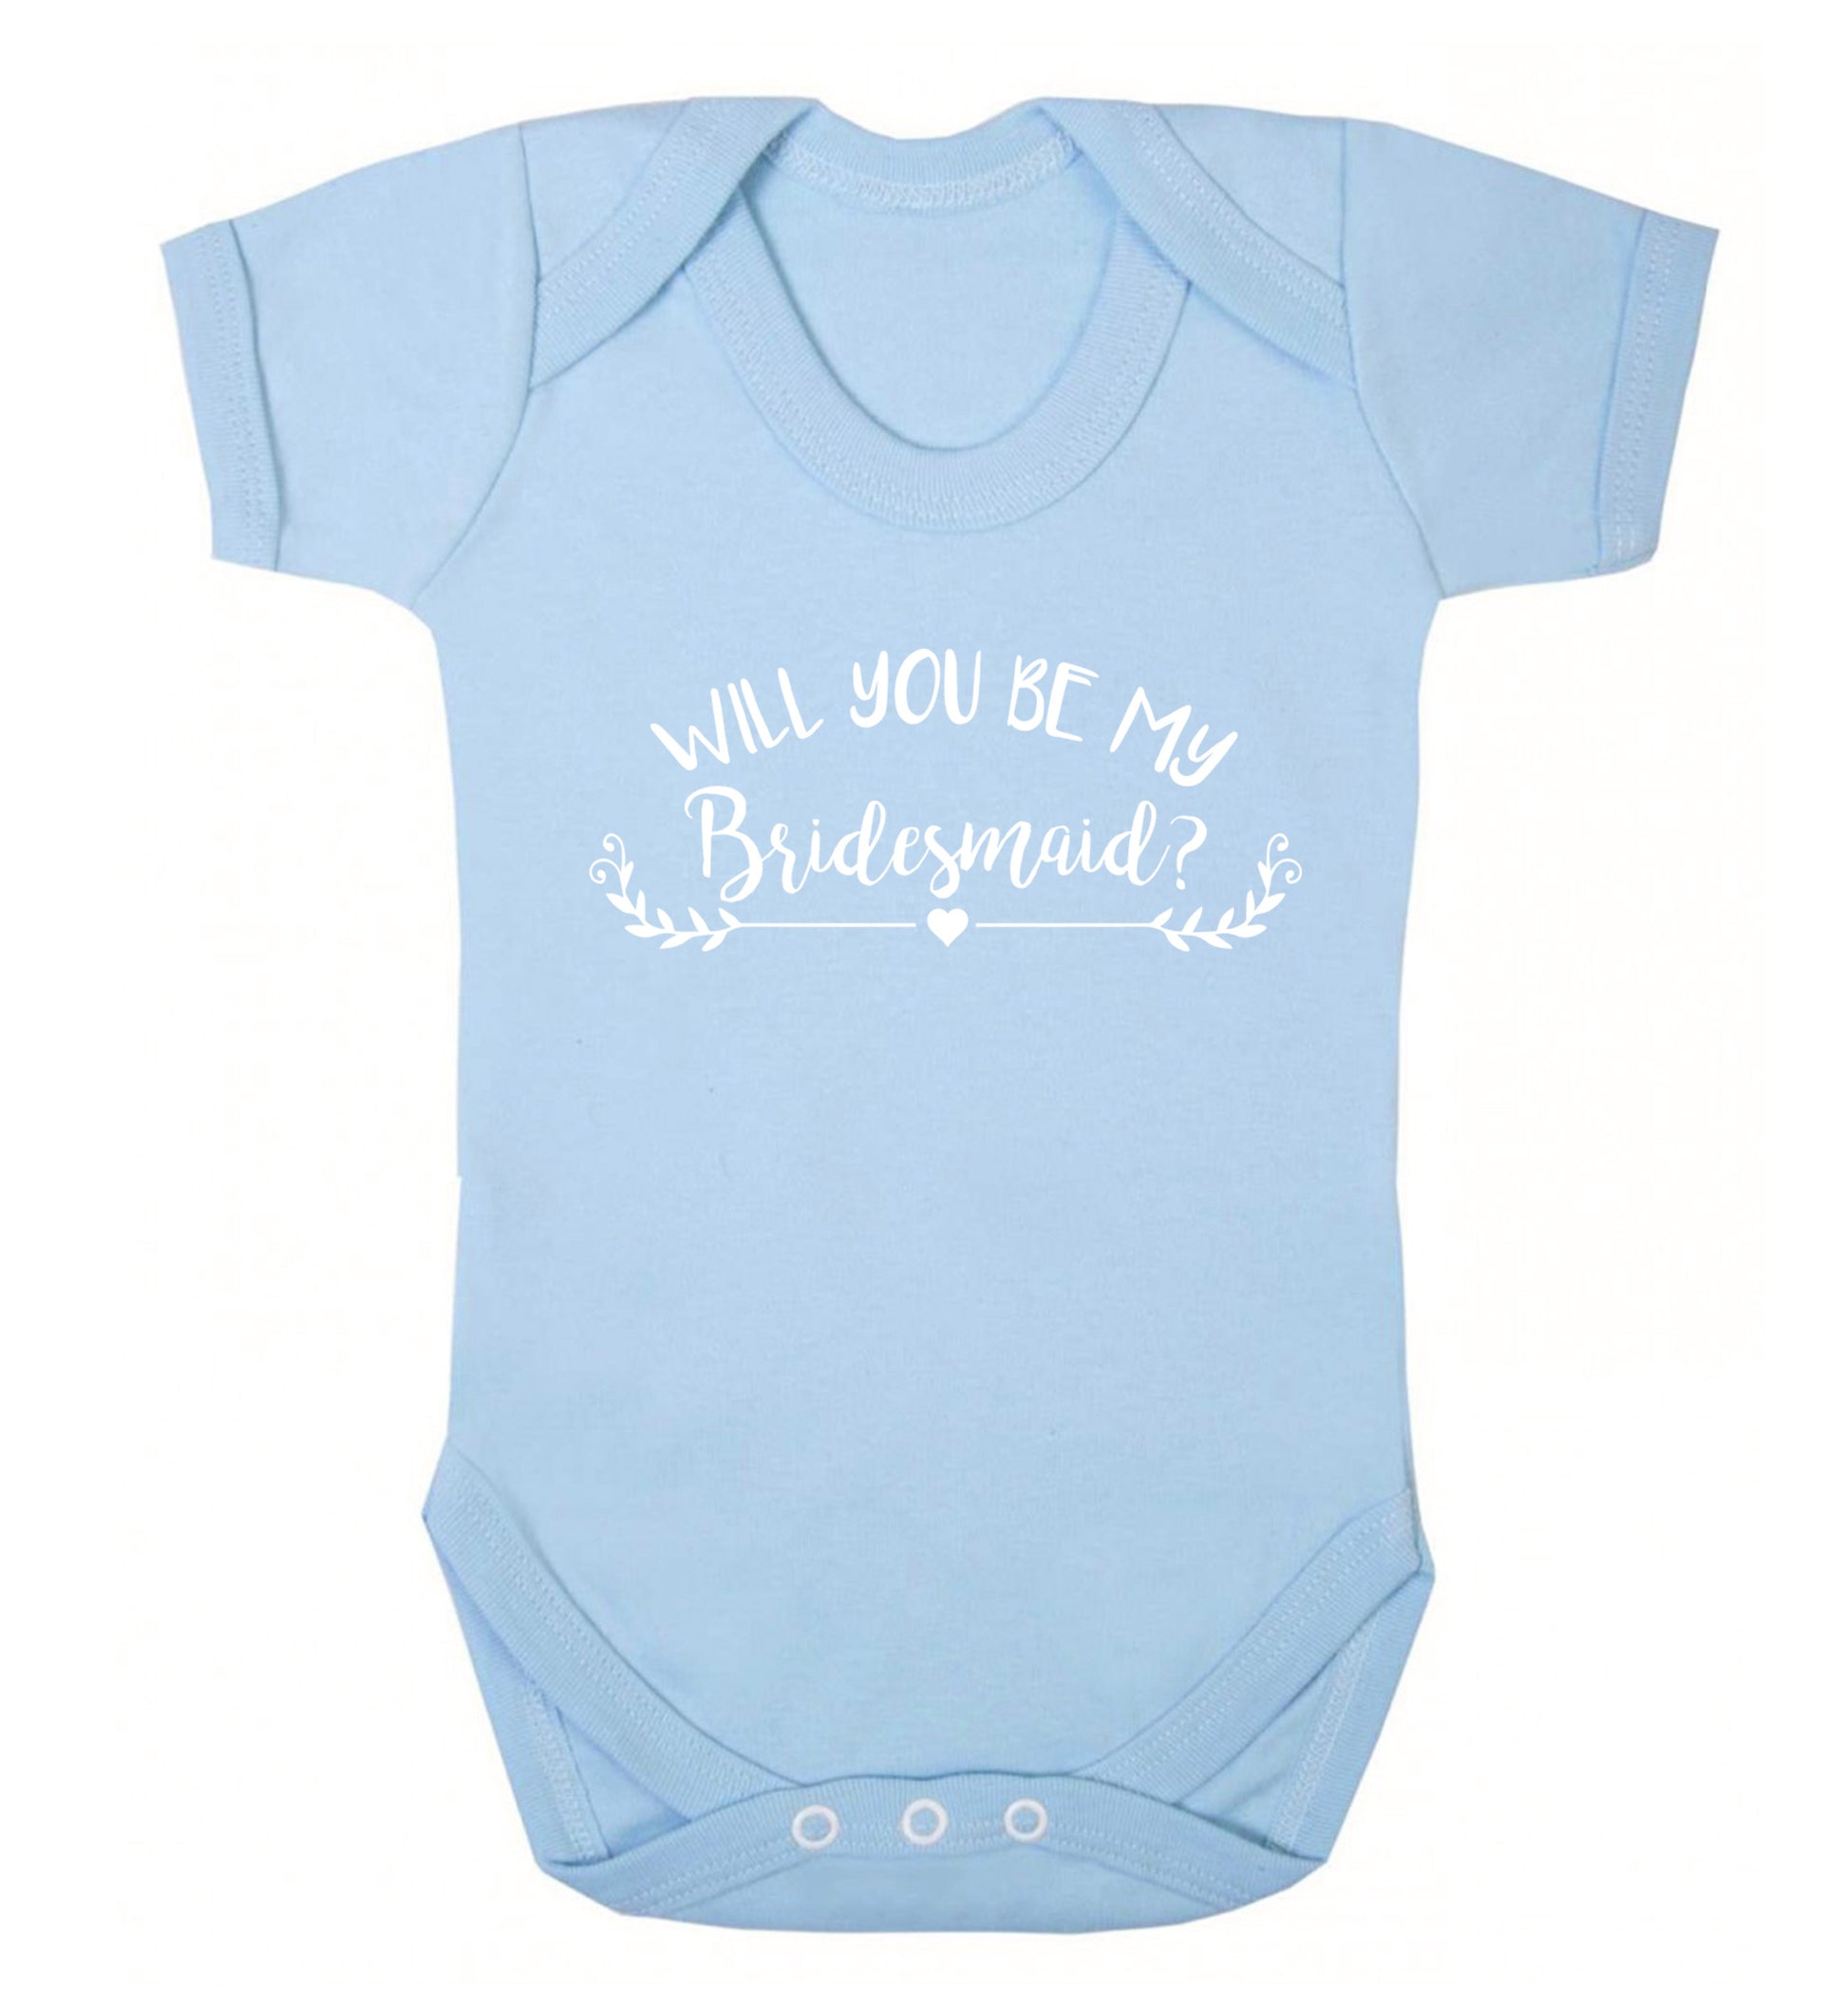 Will you be my bridesmaid? Baby Vest pale blue 18-24 months